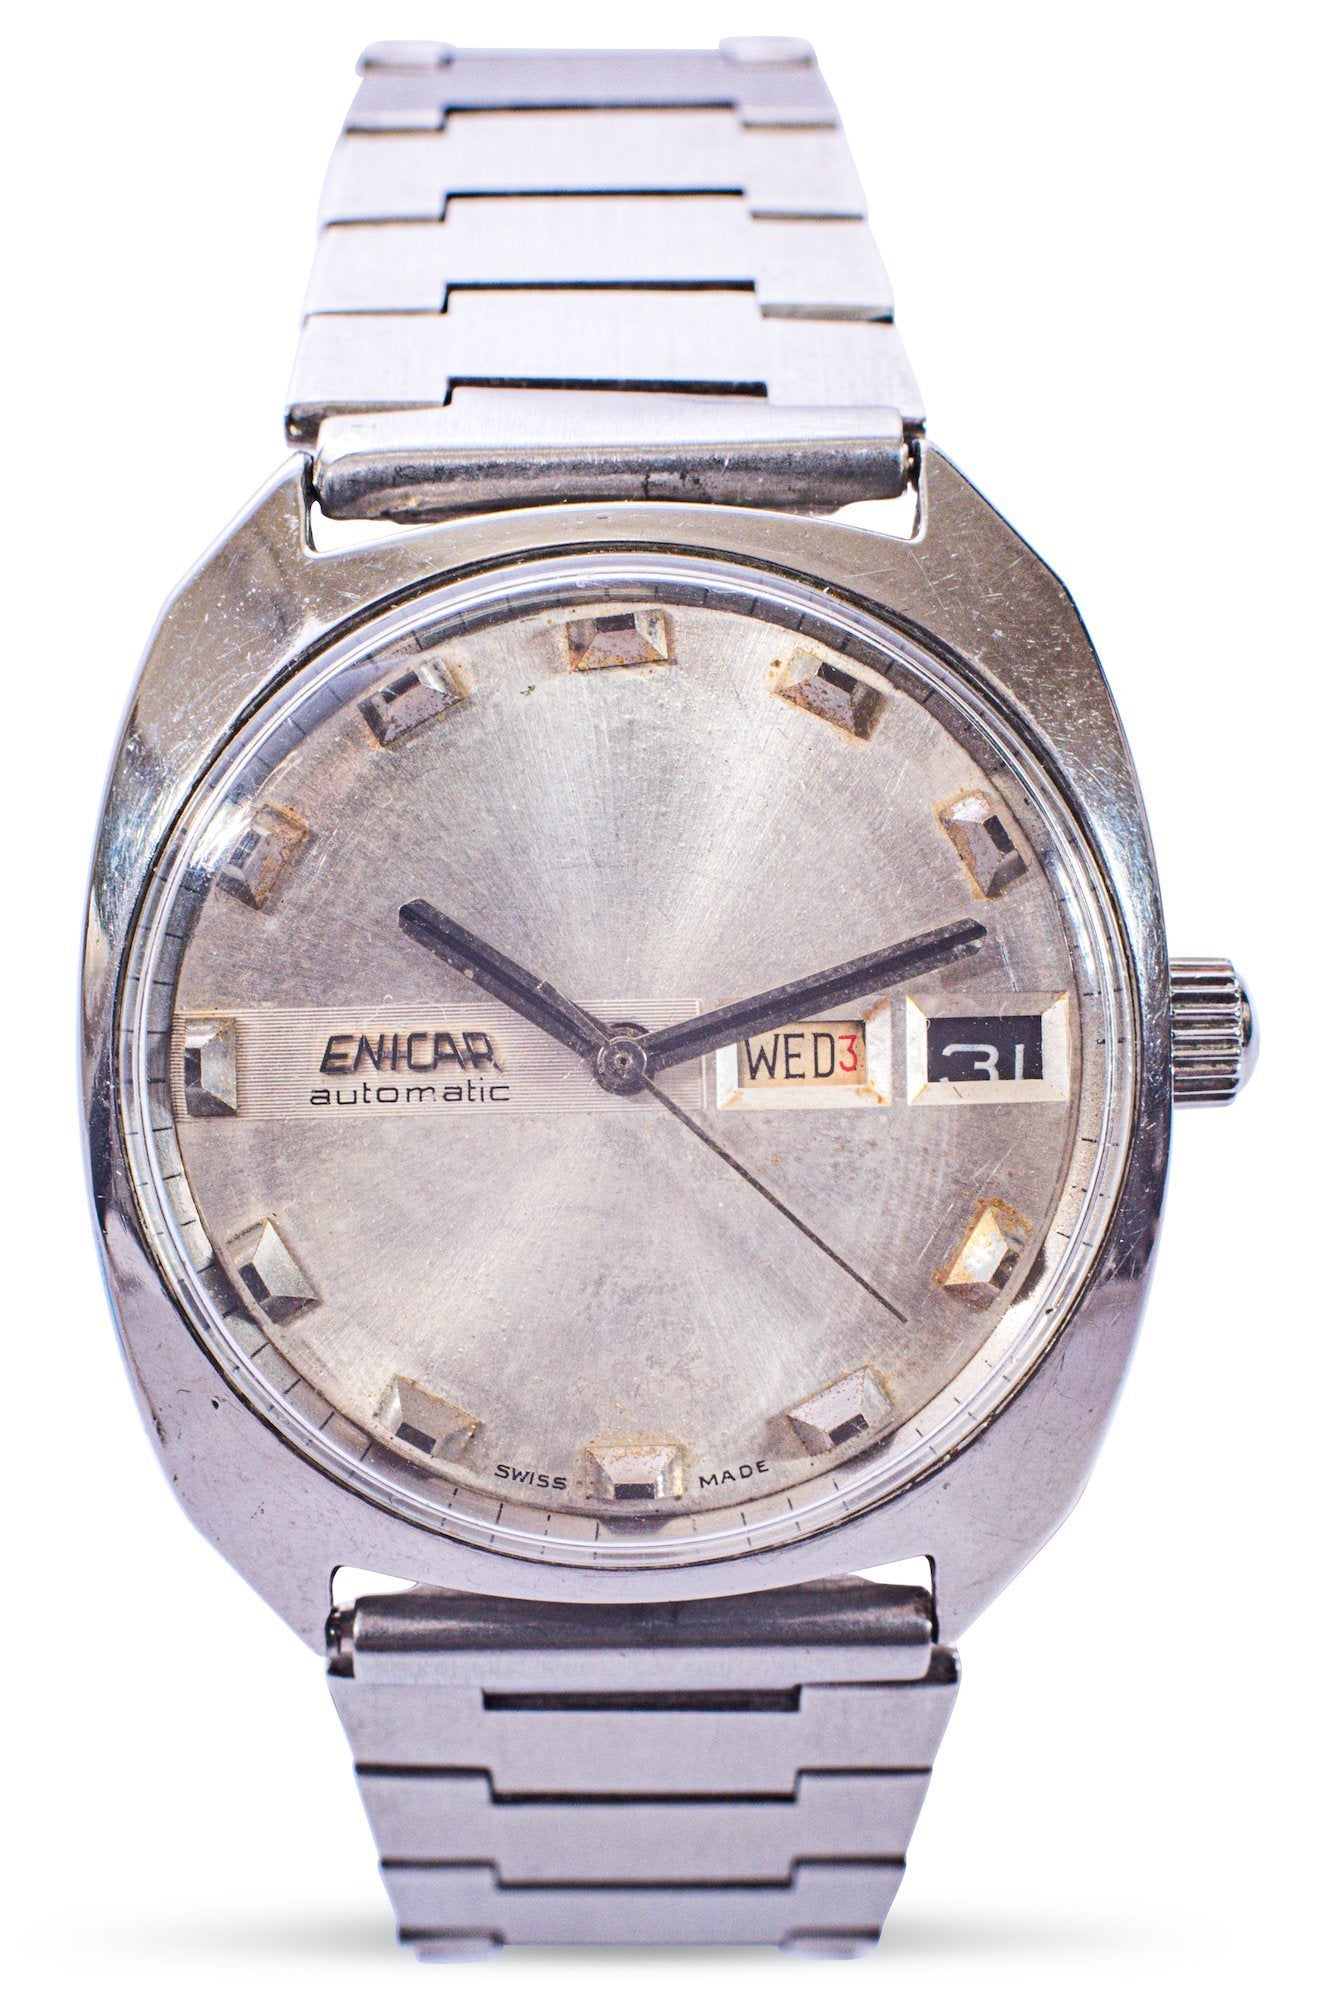 Enicar Incabloc 147-01-02 - Counting Time Watch Purveyors